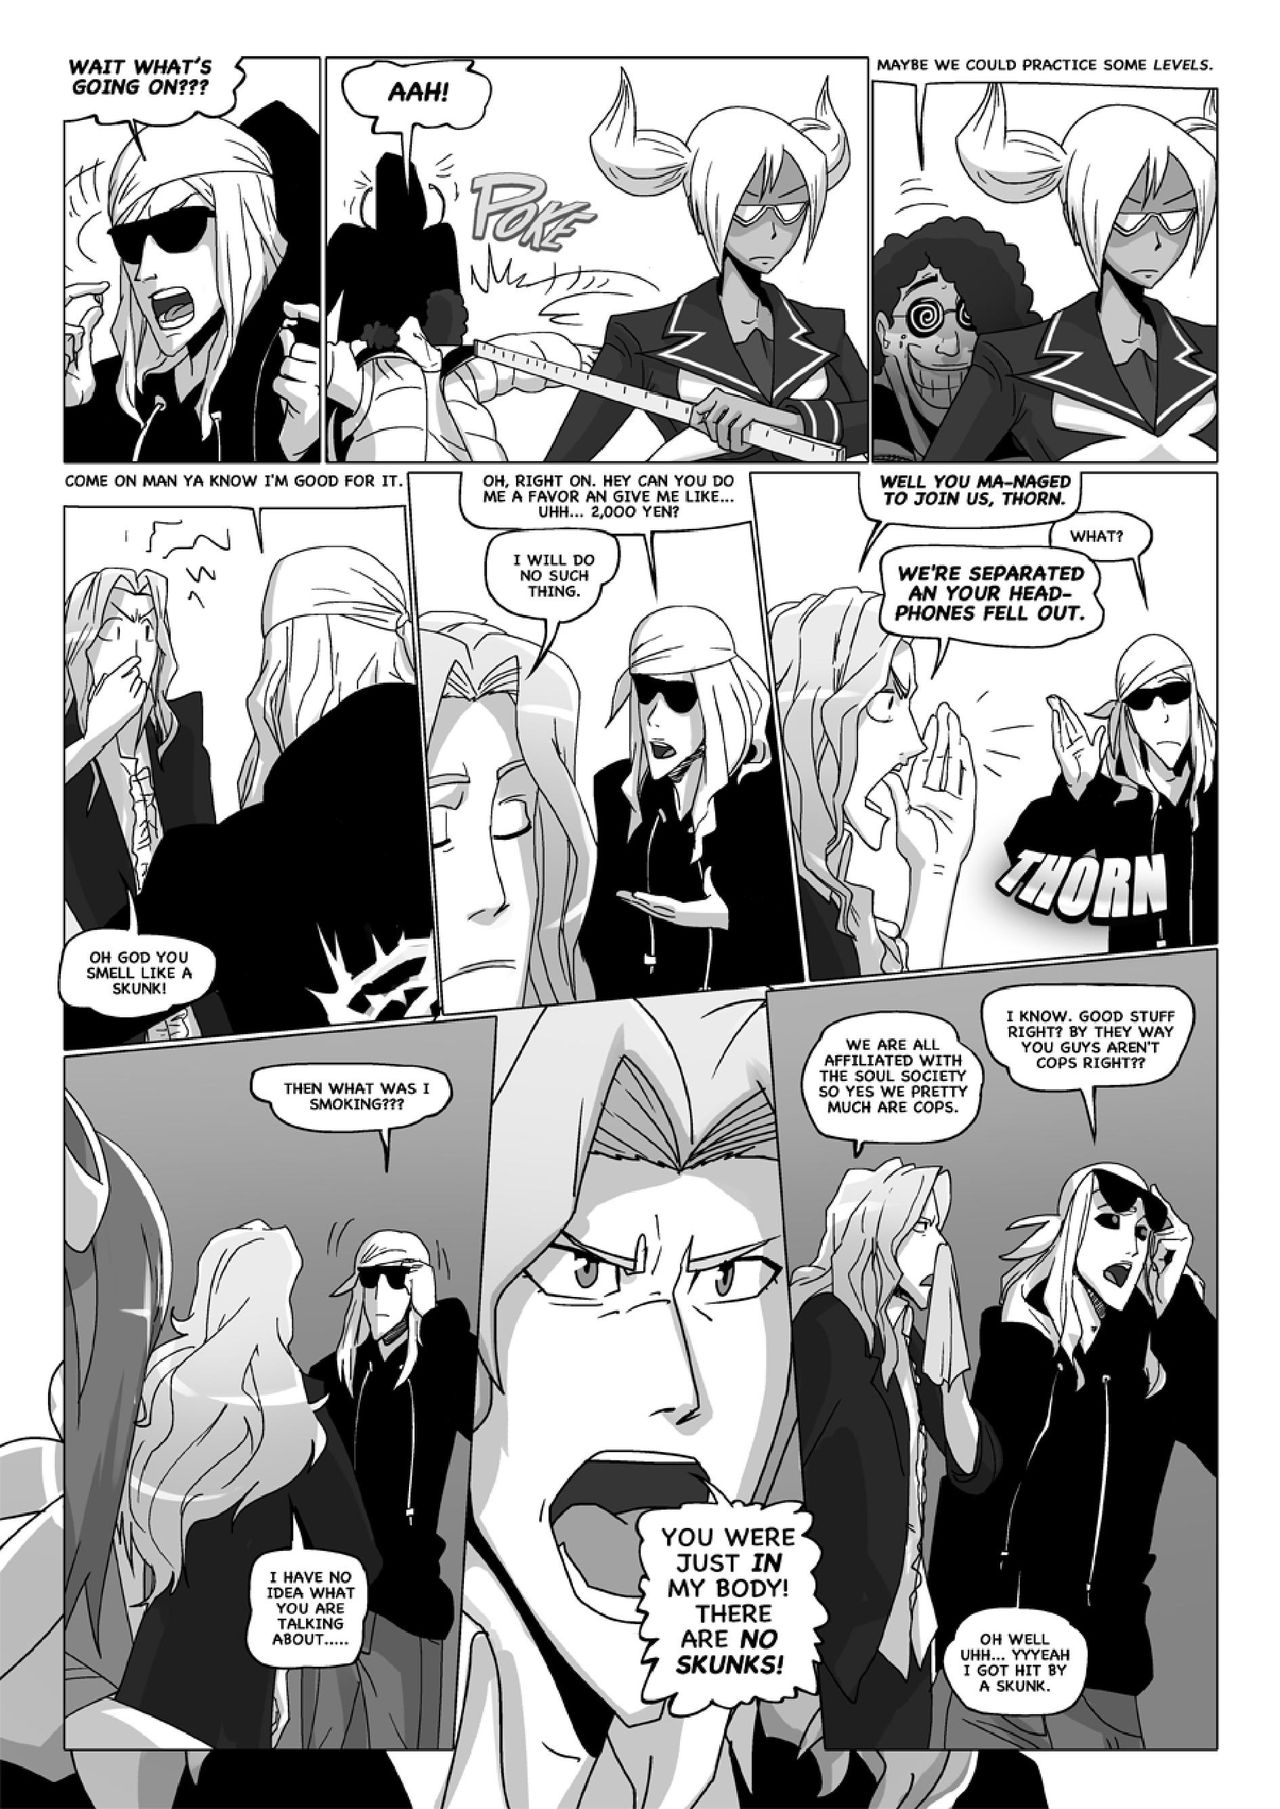 [Gairon] Happy to Serve You - Chapter 9 (Bleach) 24